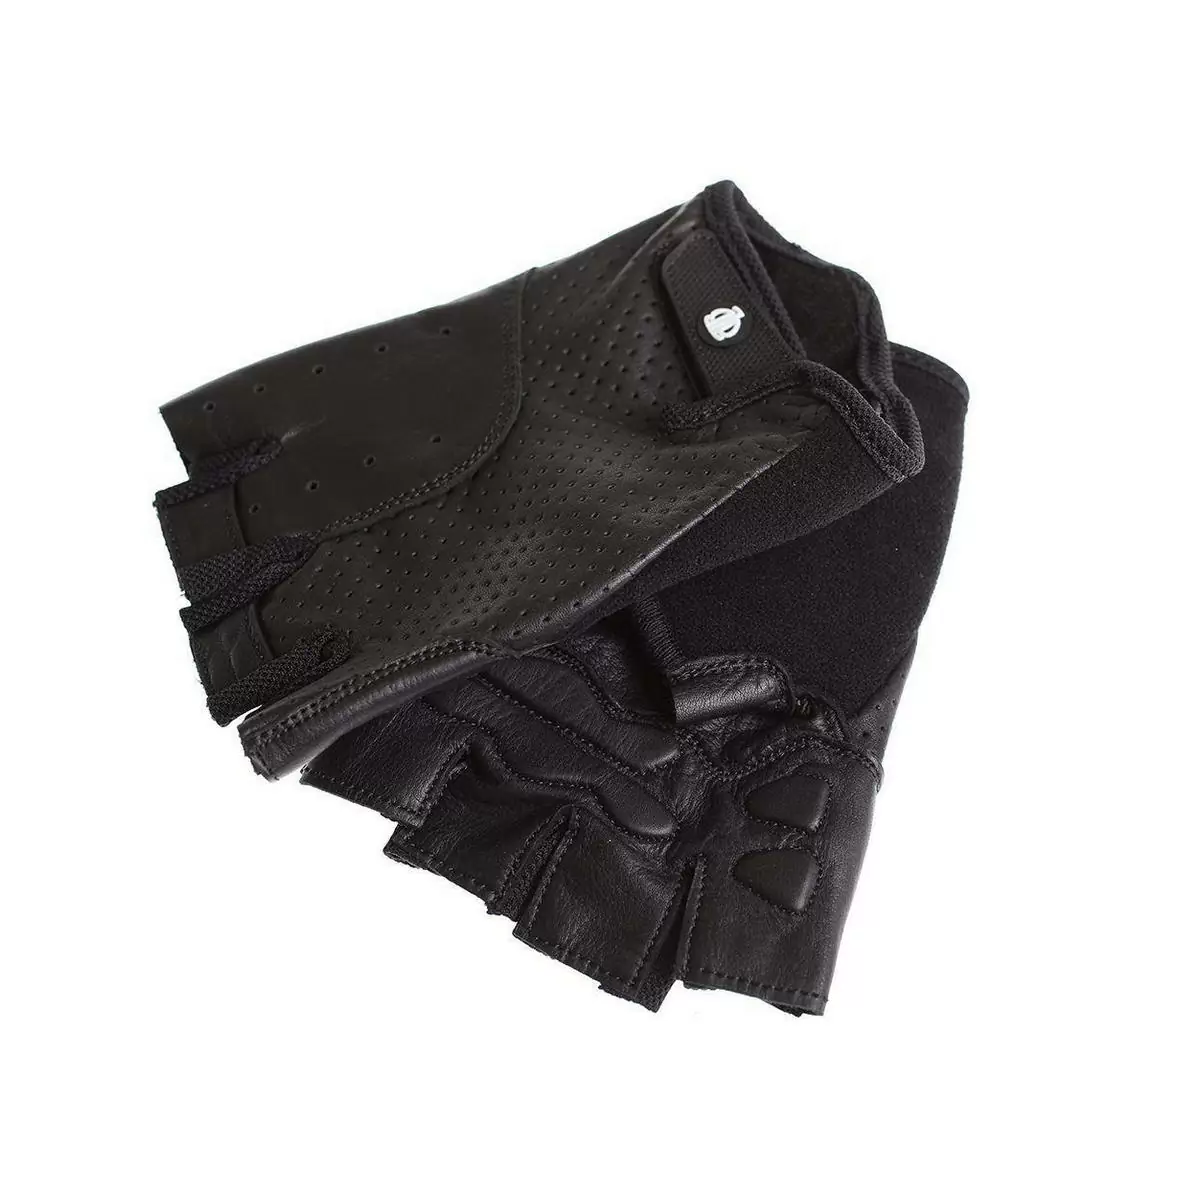 leather gloves classic sport size xl black - image